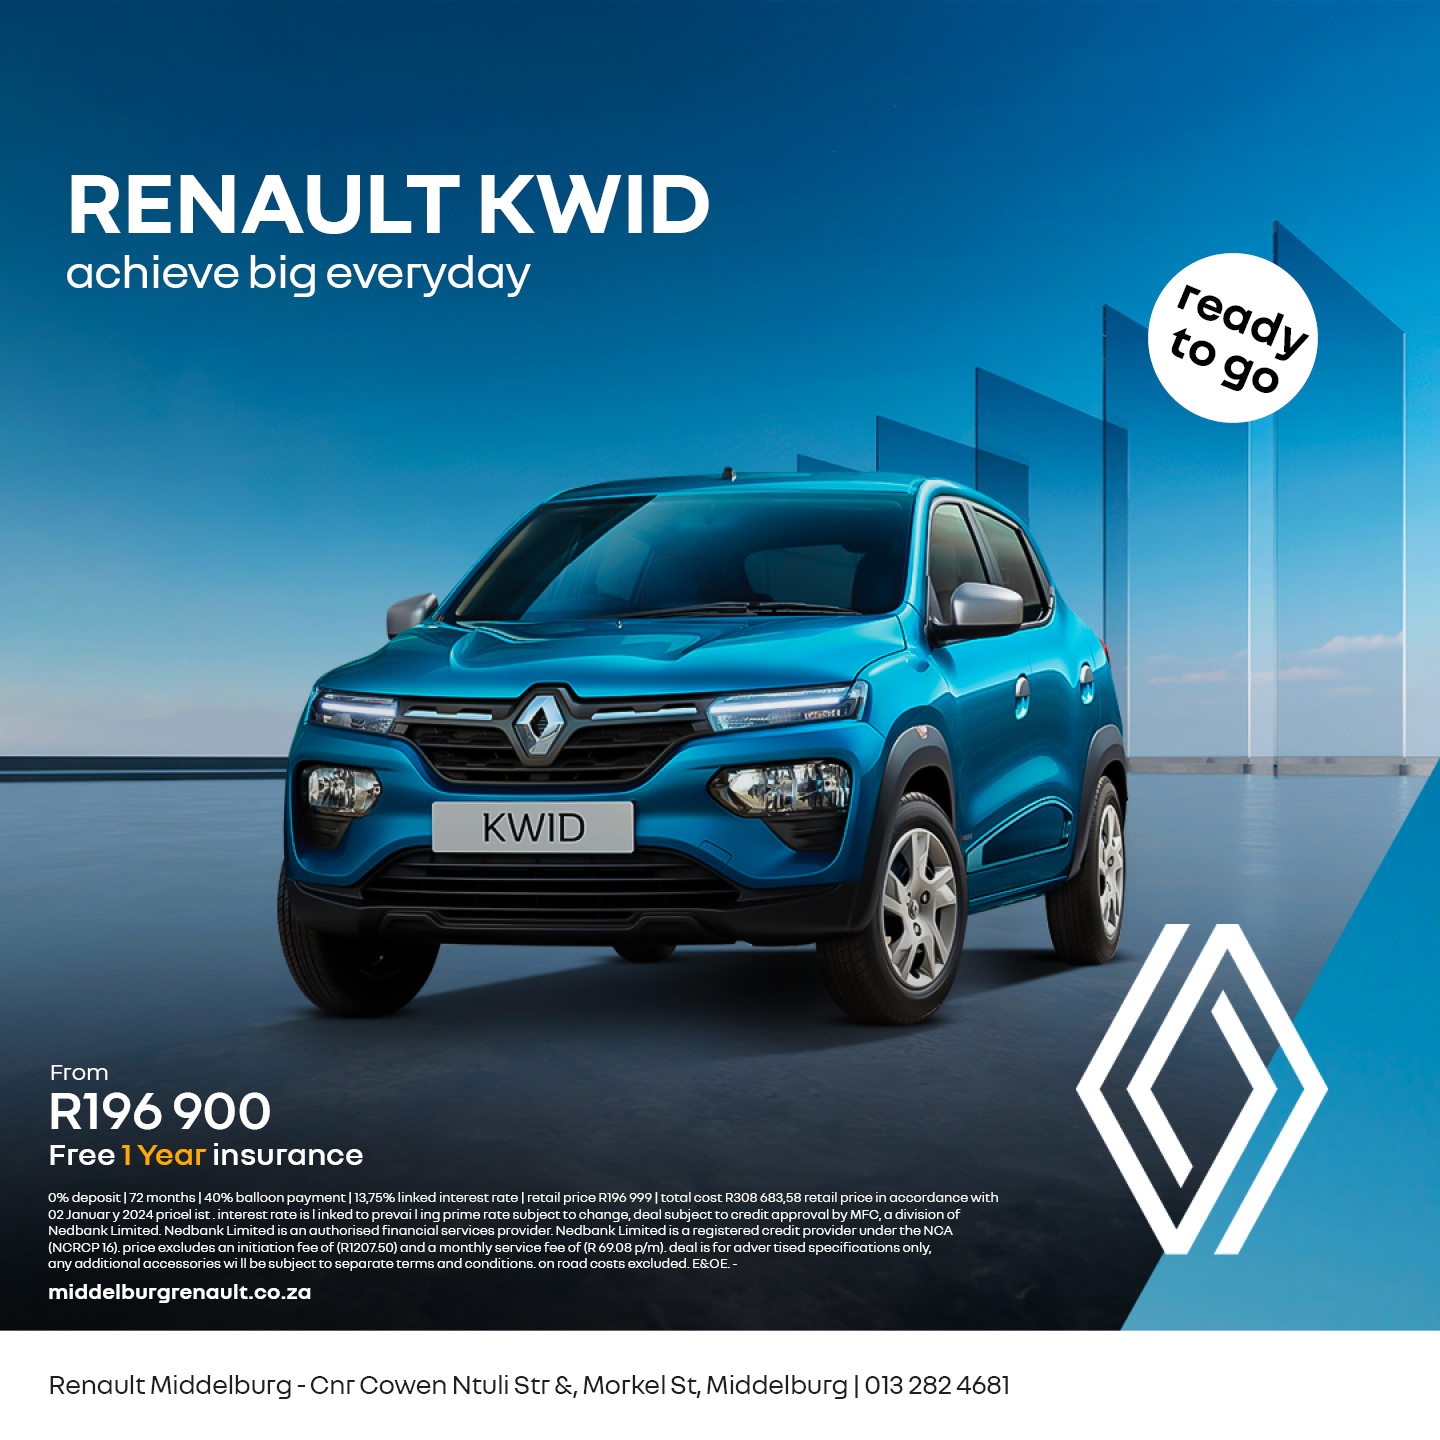 Achieve BIG everyday with the Renault KWID image from 